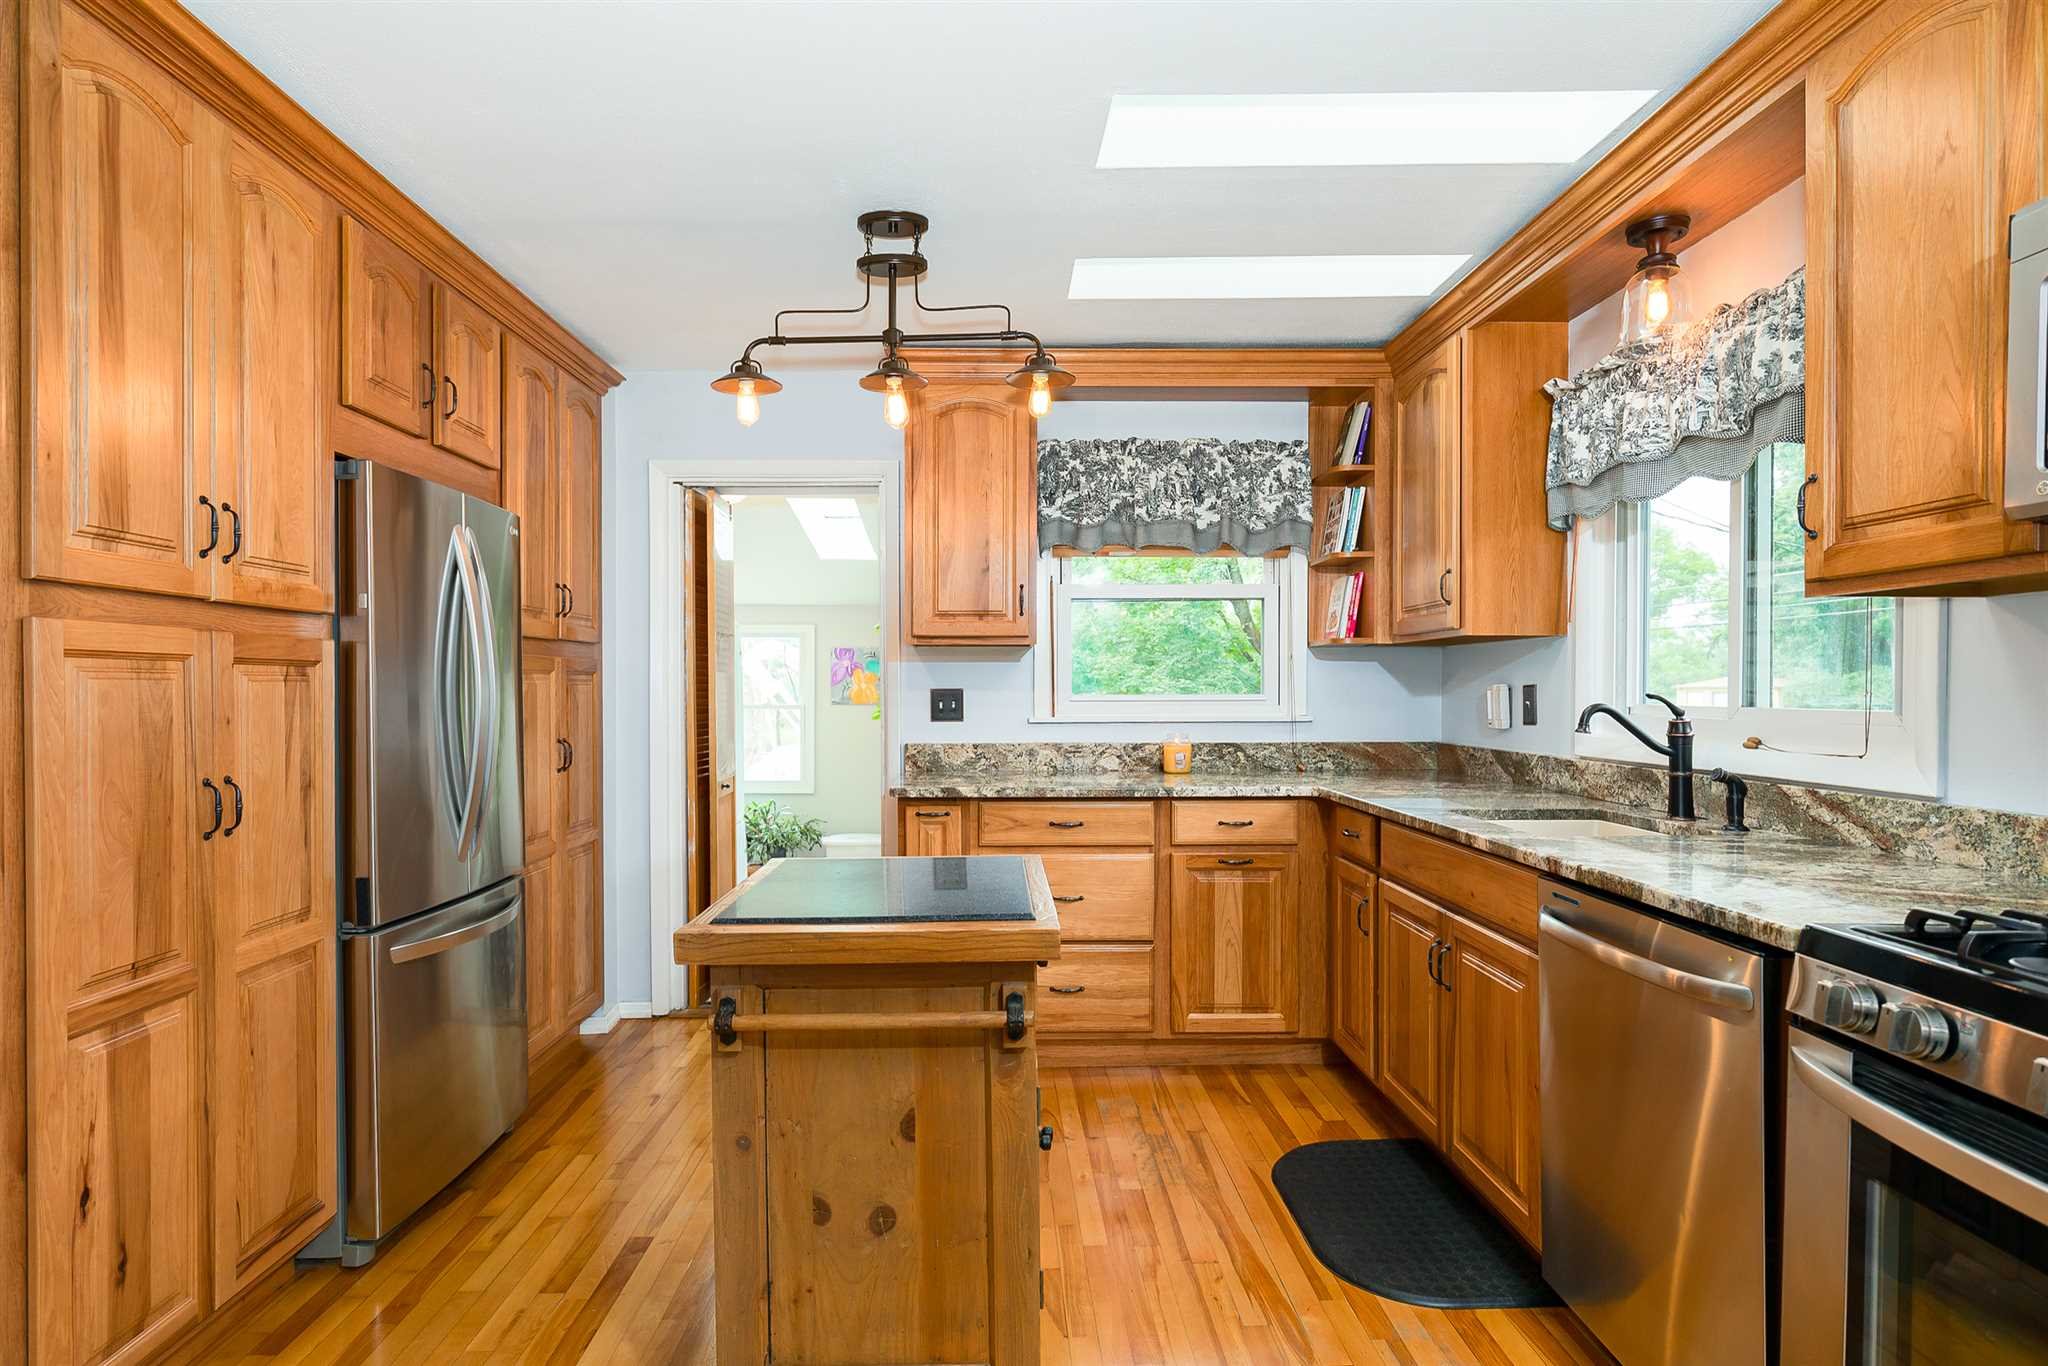 a kitchen with stainless steel appliances granite countertop a refrigerator a sink dishwasher a stove and white countertops with wooden floor